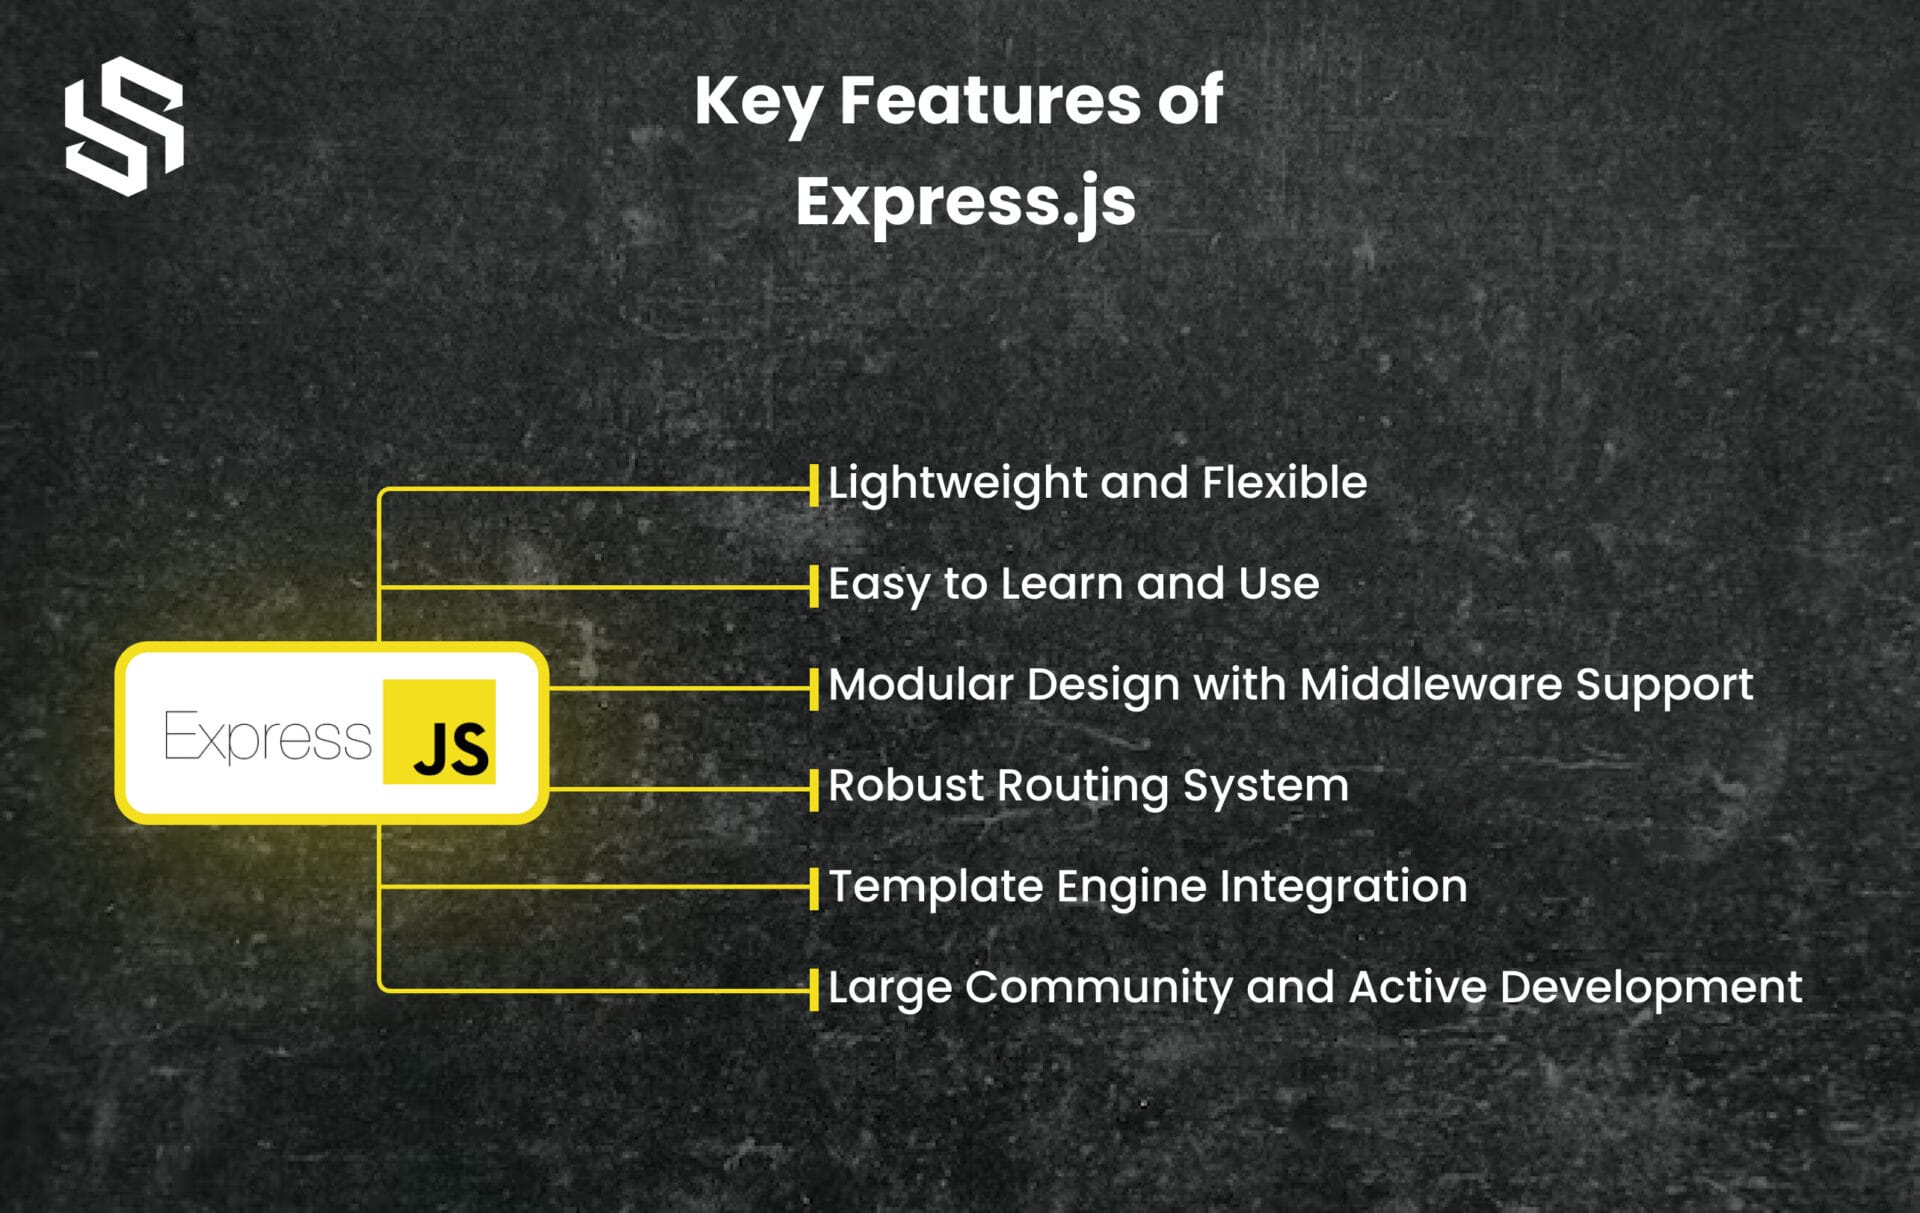 Key Features of Express.js